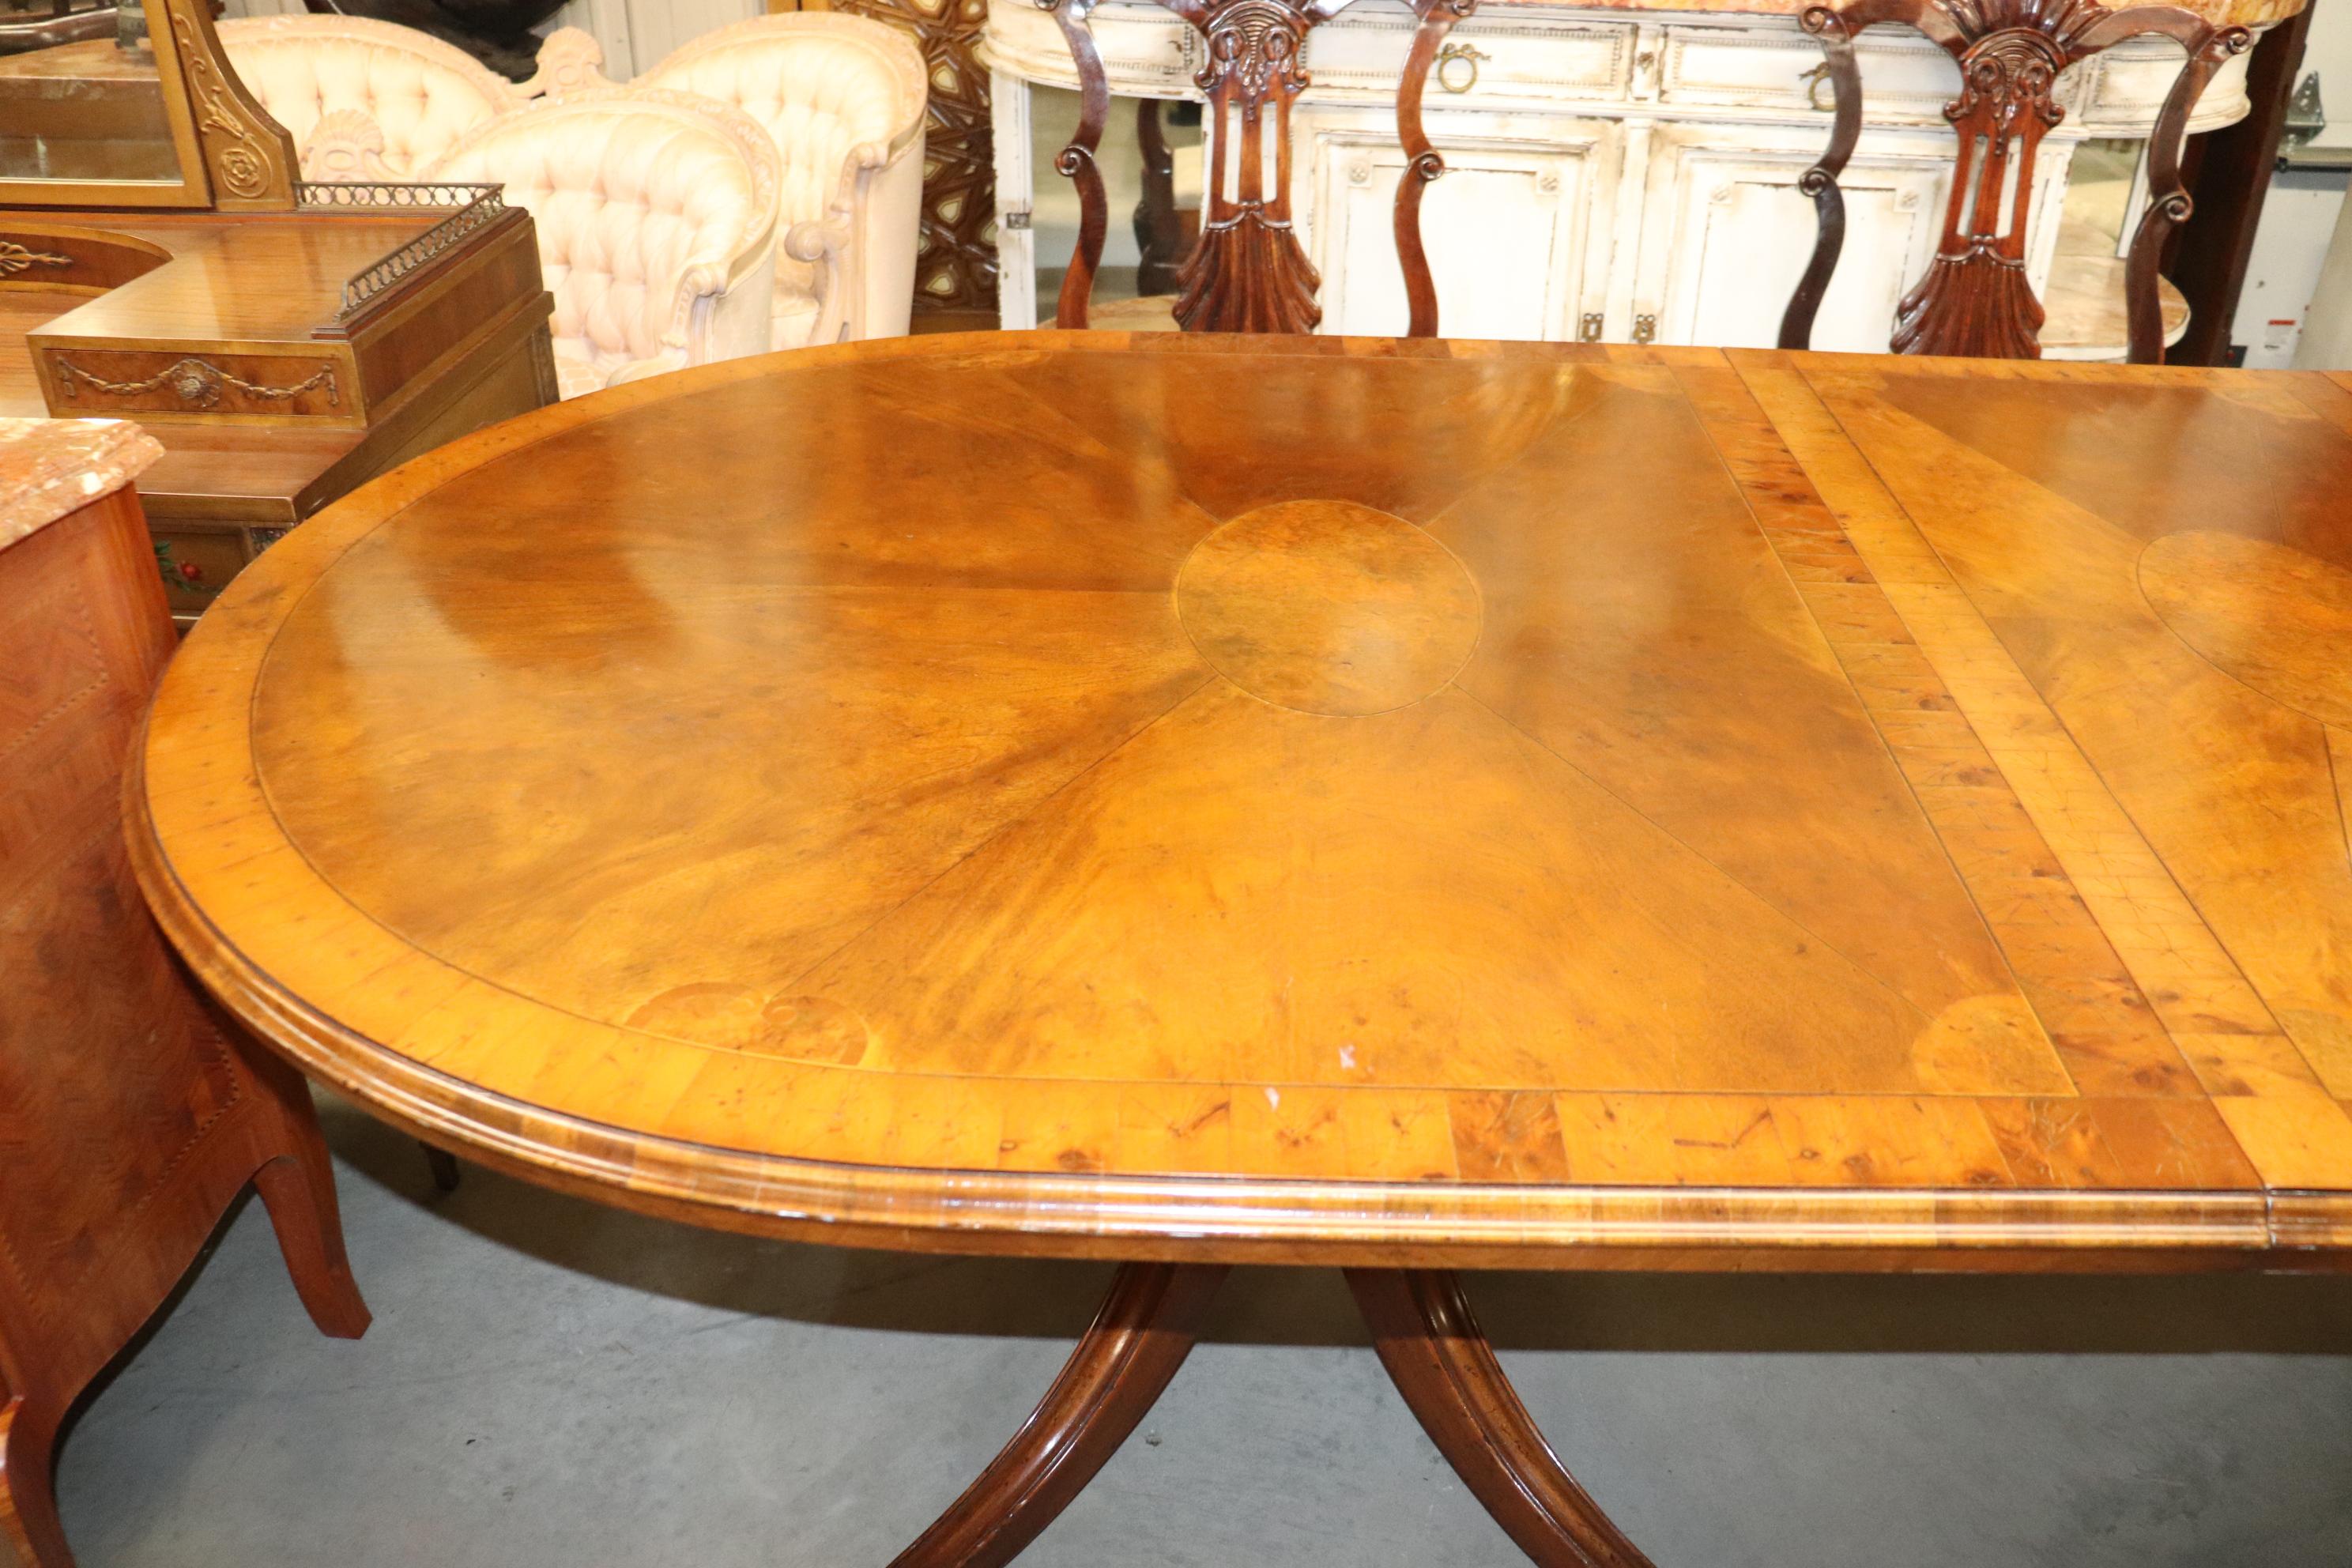 Late 20th Century English Regency Style Oyster Burled Inlaid Walnut Dining Table with Two Leaves 